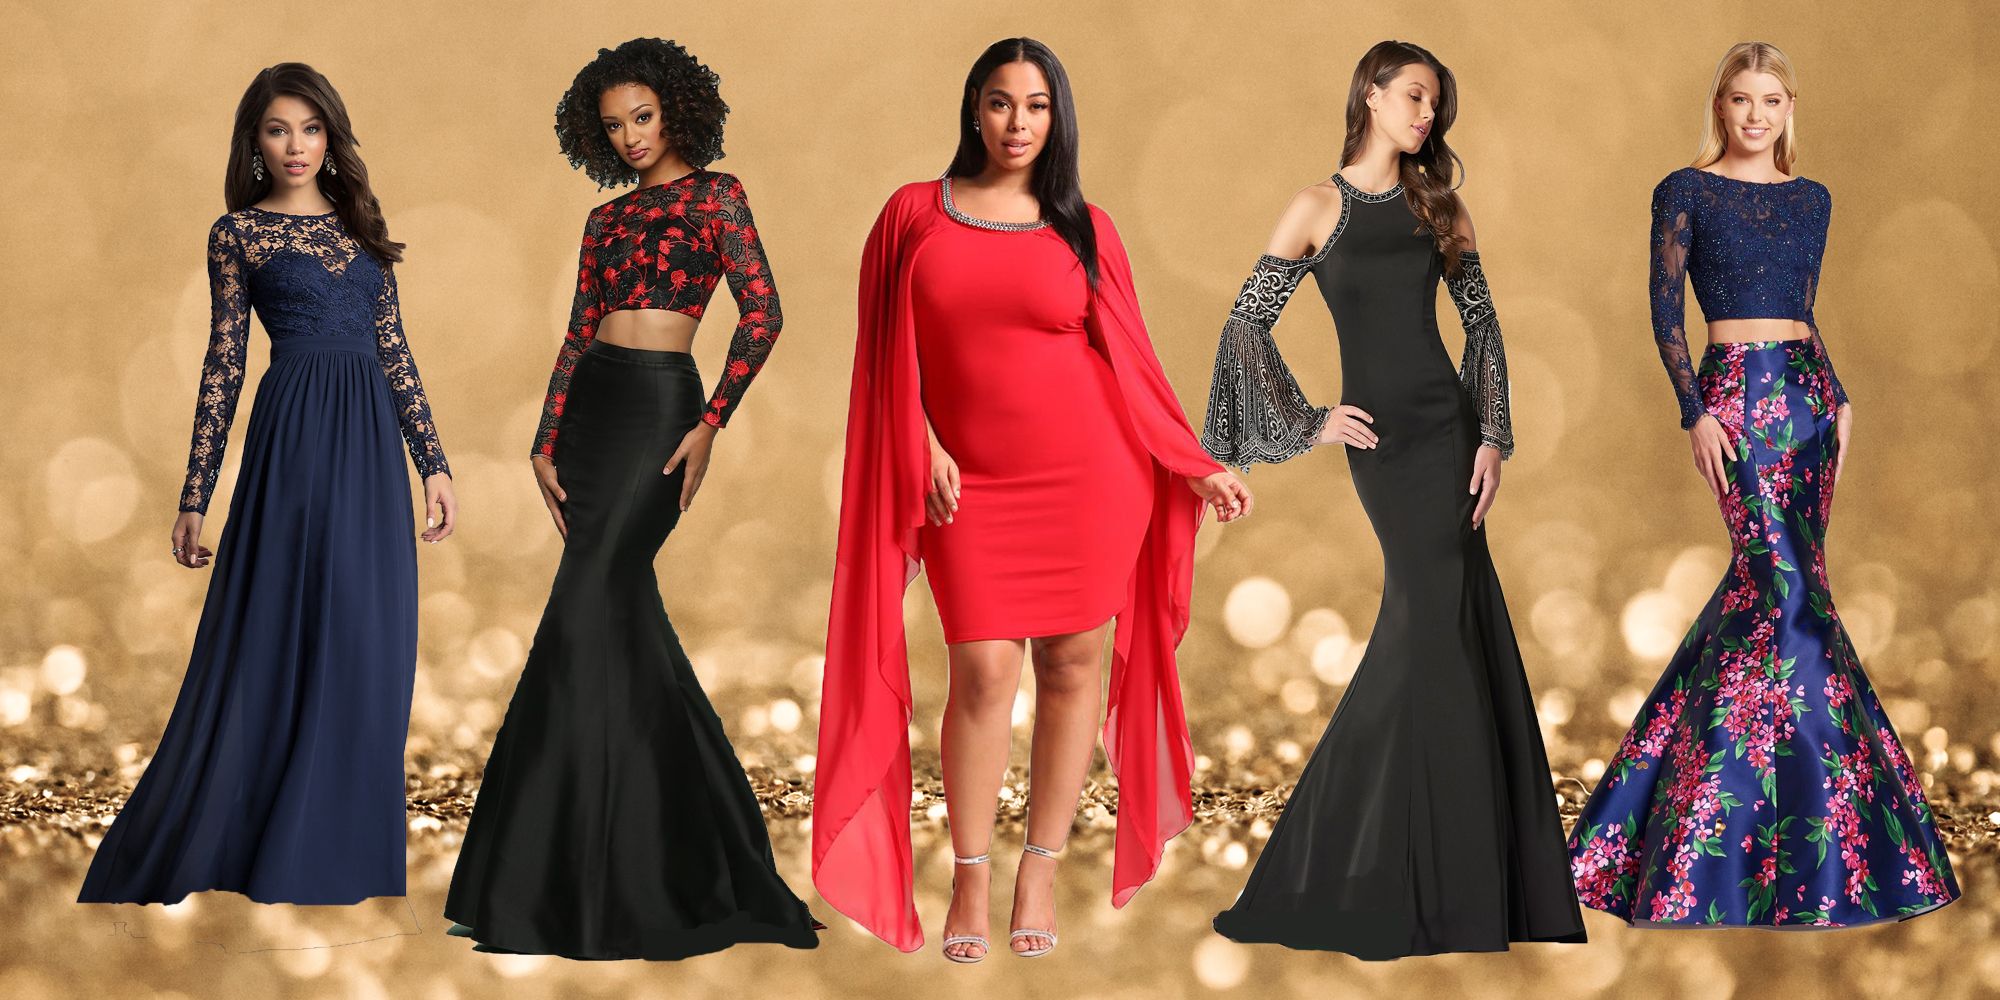 11 most elegant long sleeve prom dresses of 2018 for a modest look